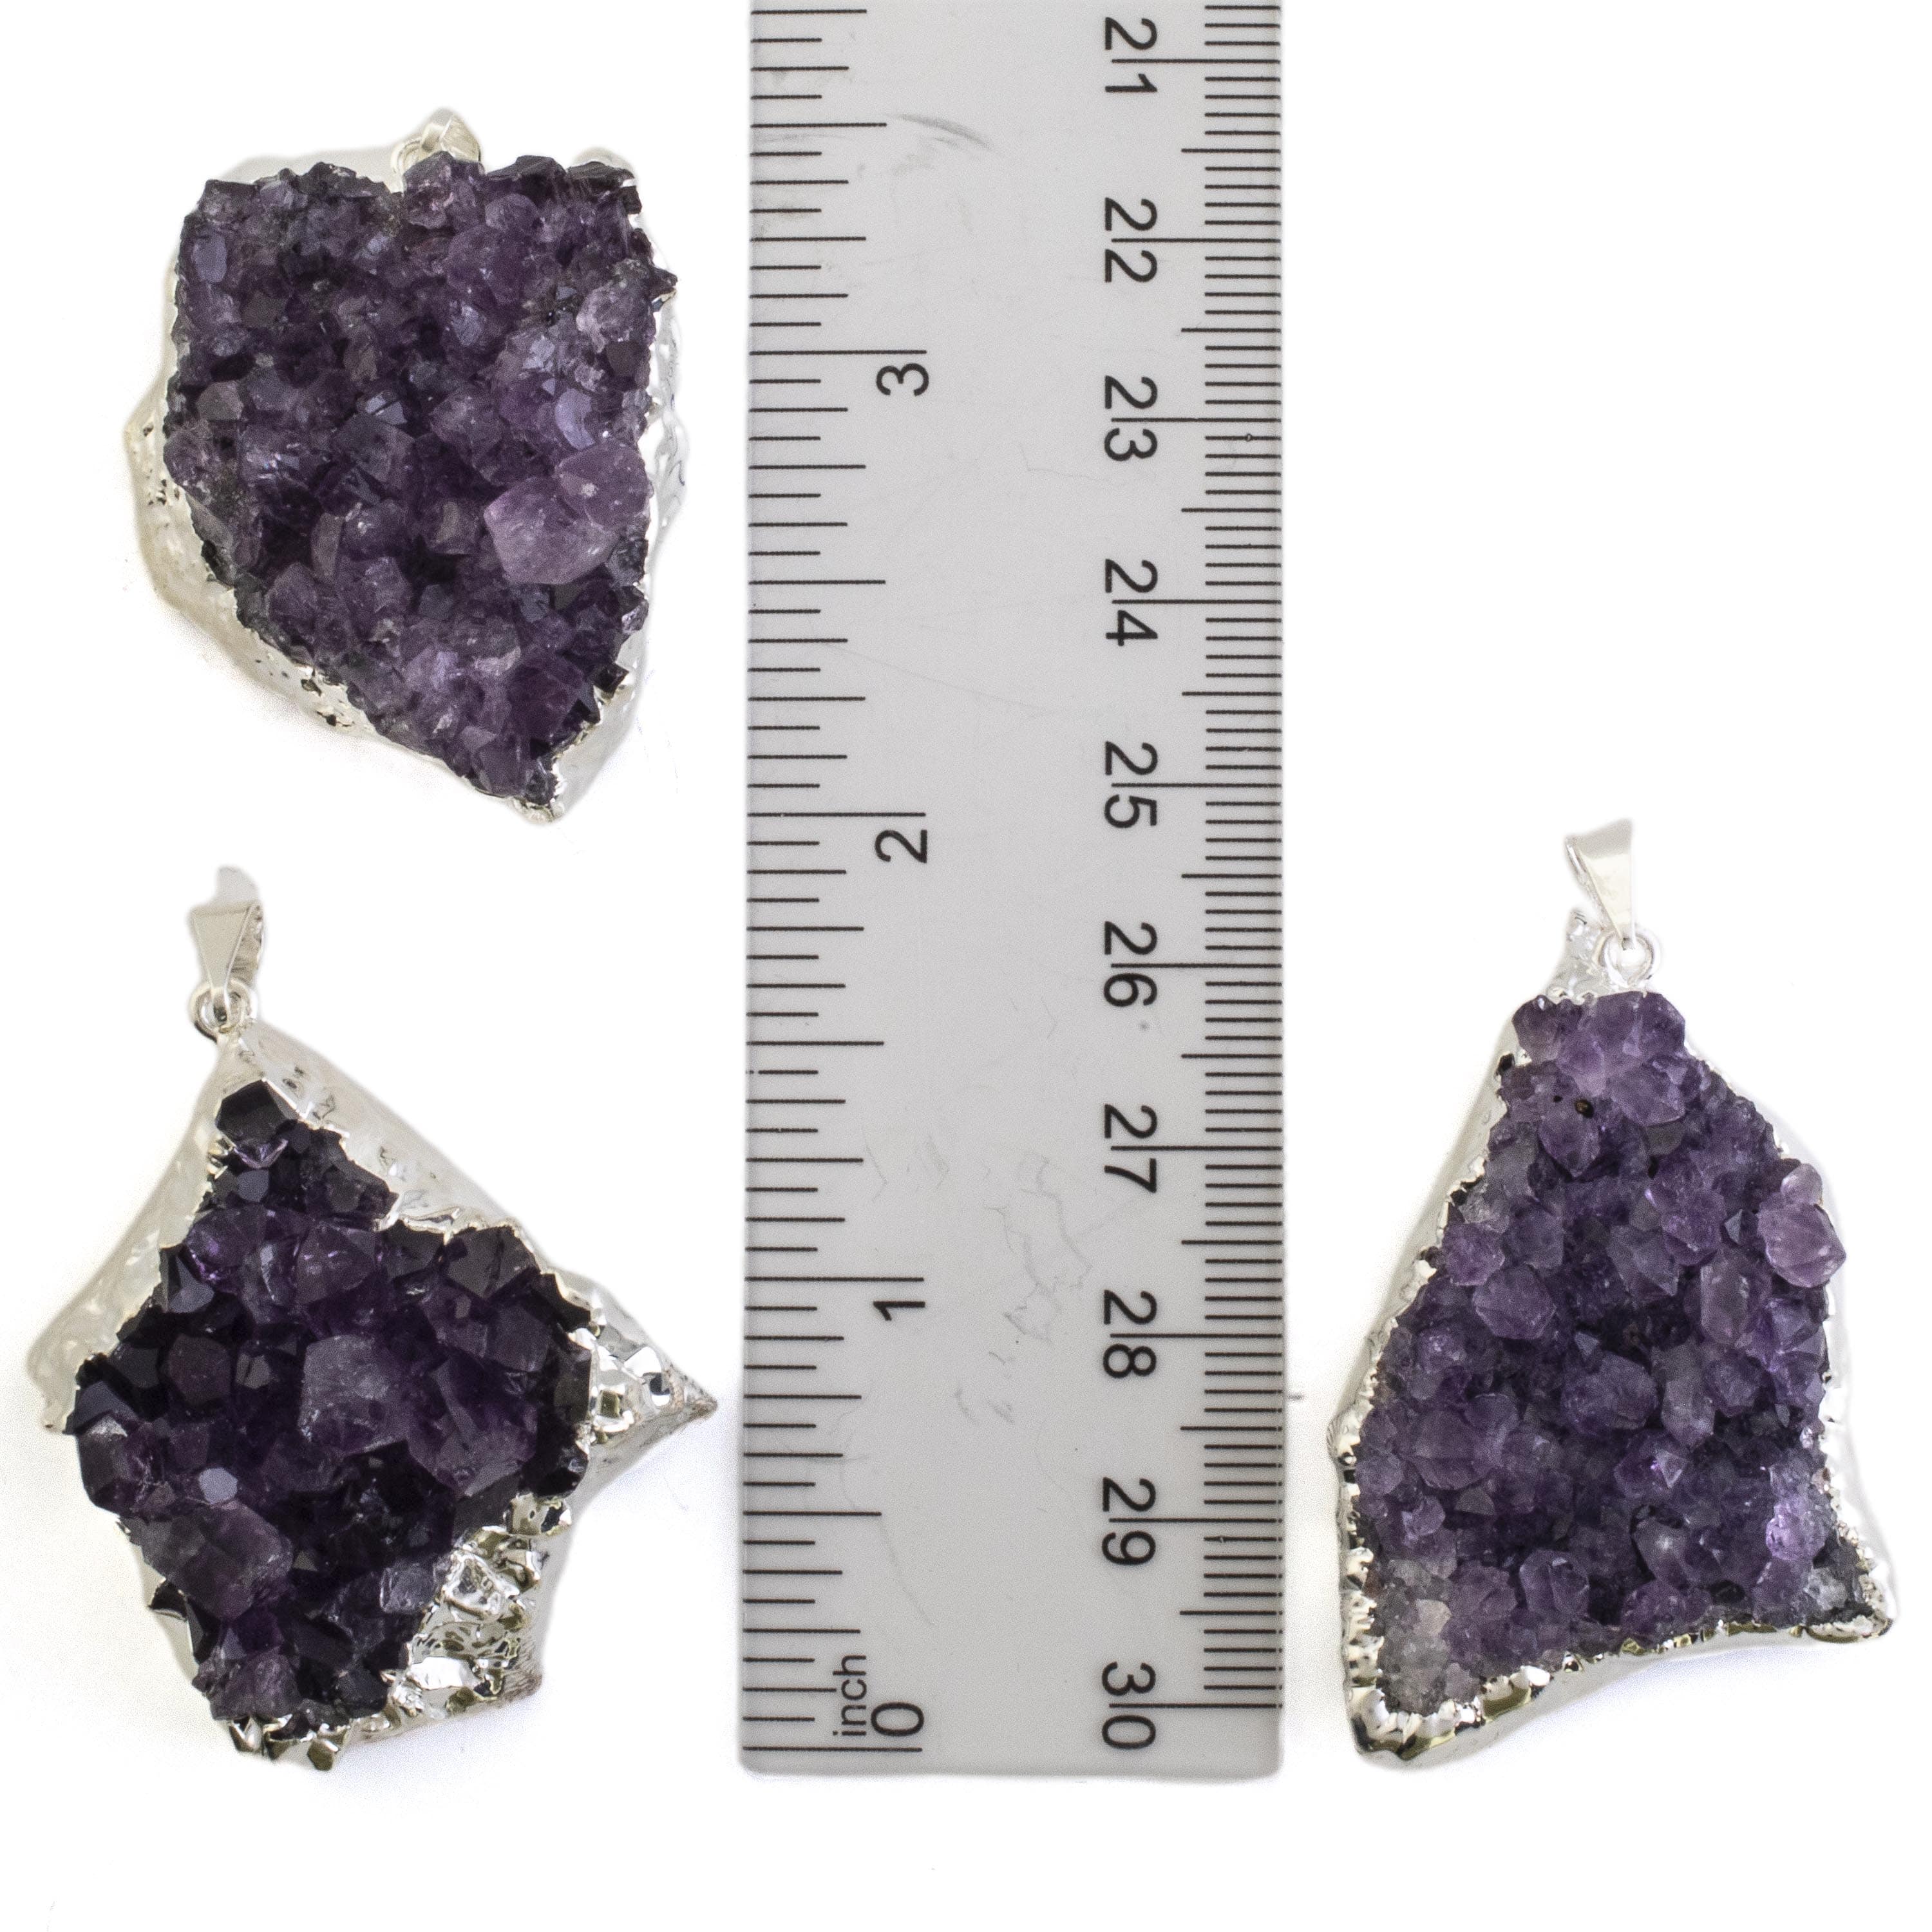 Kalifano Crystal Jewelry Druzy Amethyst Pendant with Silver Plating CJNS80-DYAM